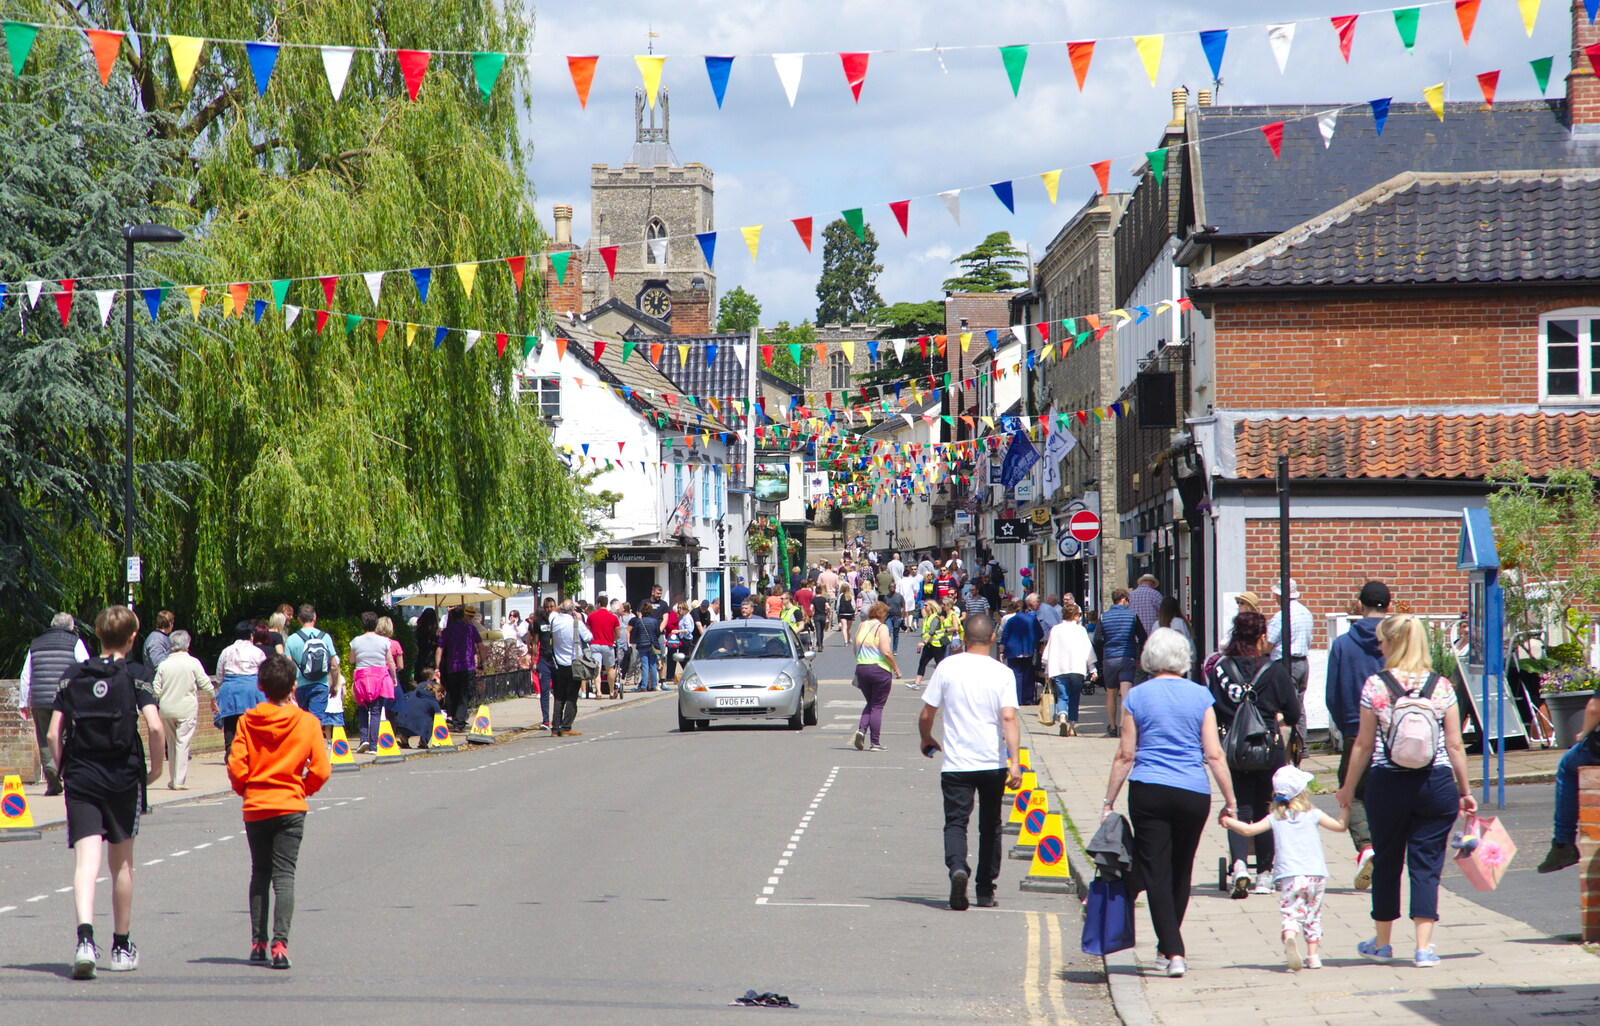 The bunting's out on Mere Street from The Diss Carnival 2019, Diss, Norfolk - 9th June 2019